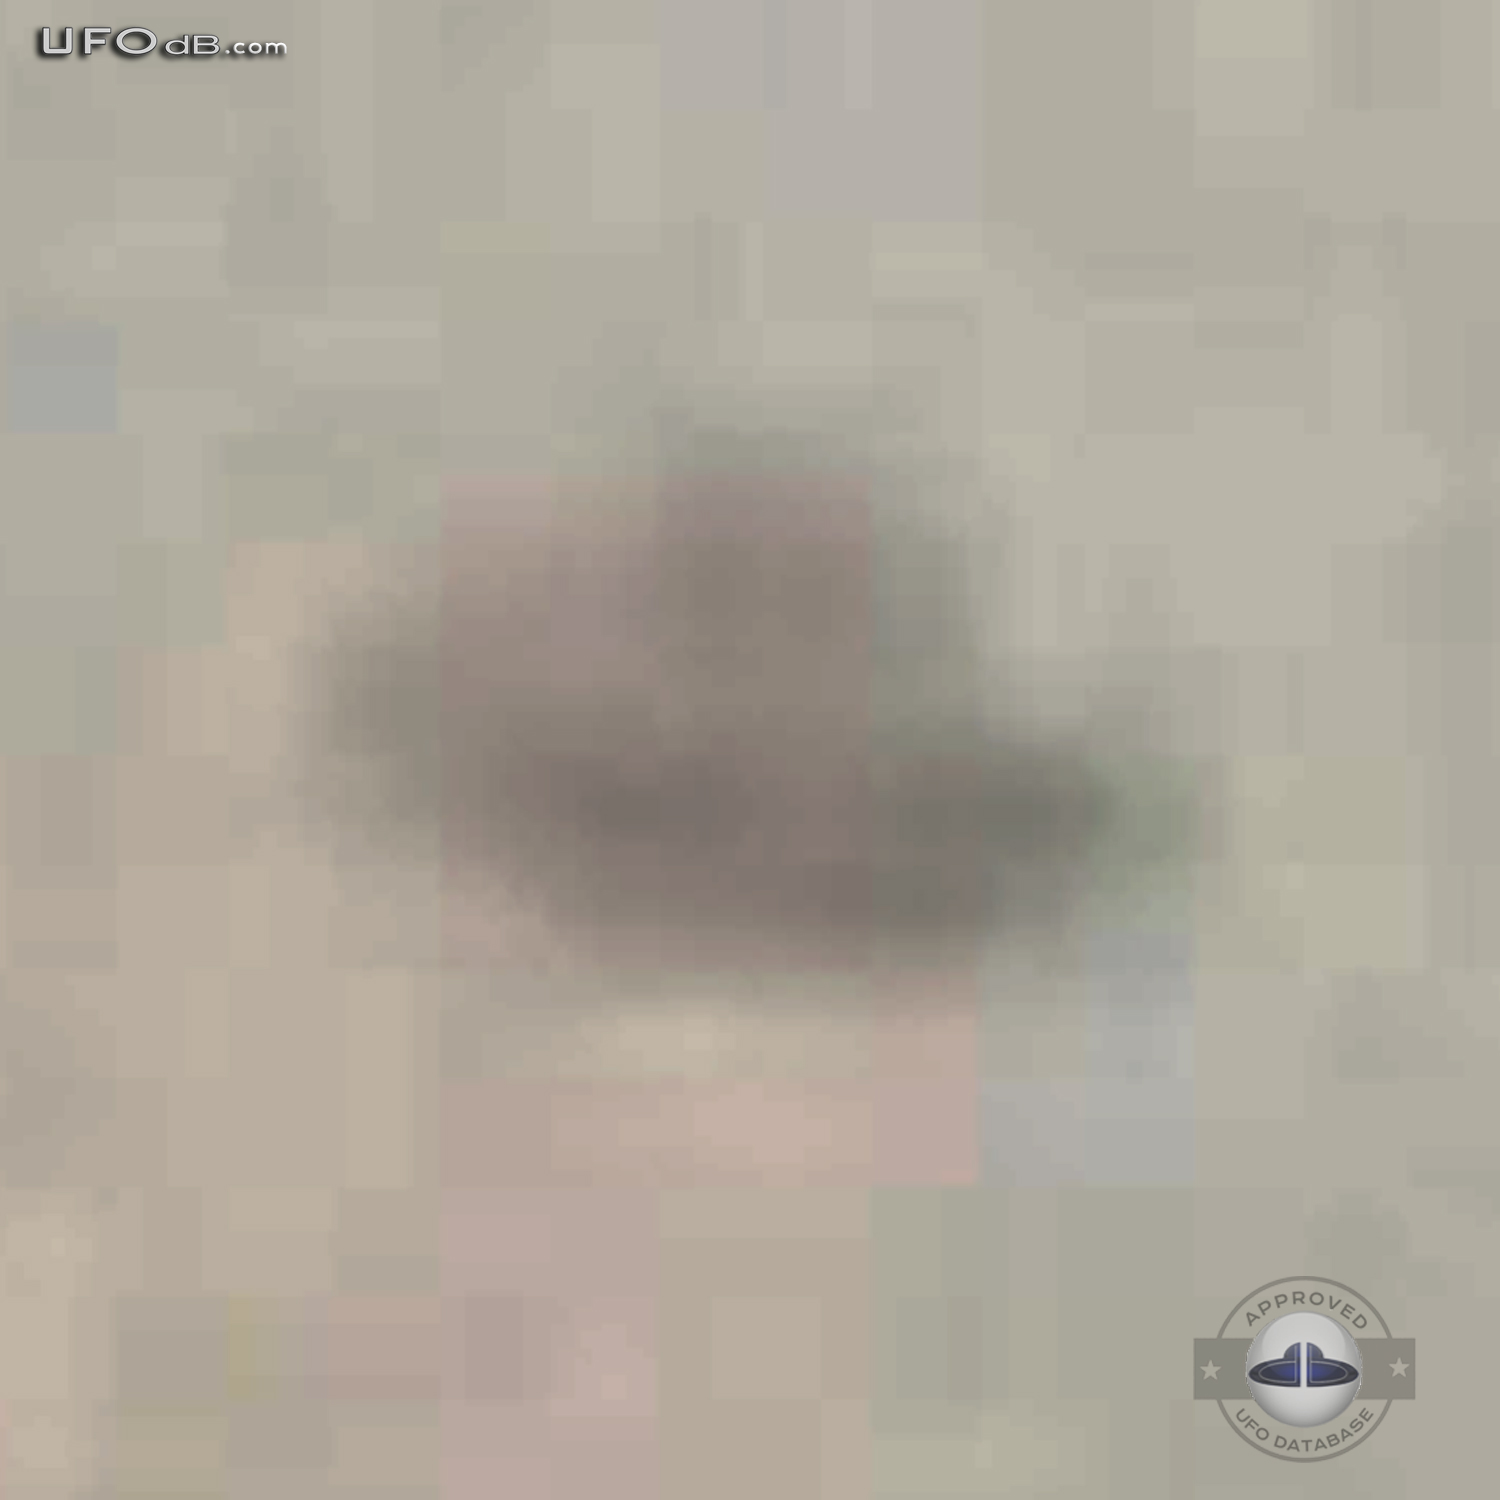 Chinese Sales manager get UFO picture on Hangzhou Bay Bridge in China UFO Picture #359-4